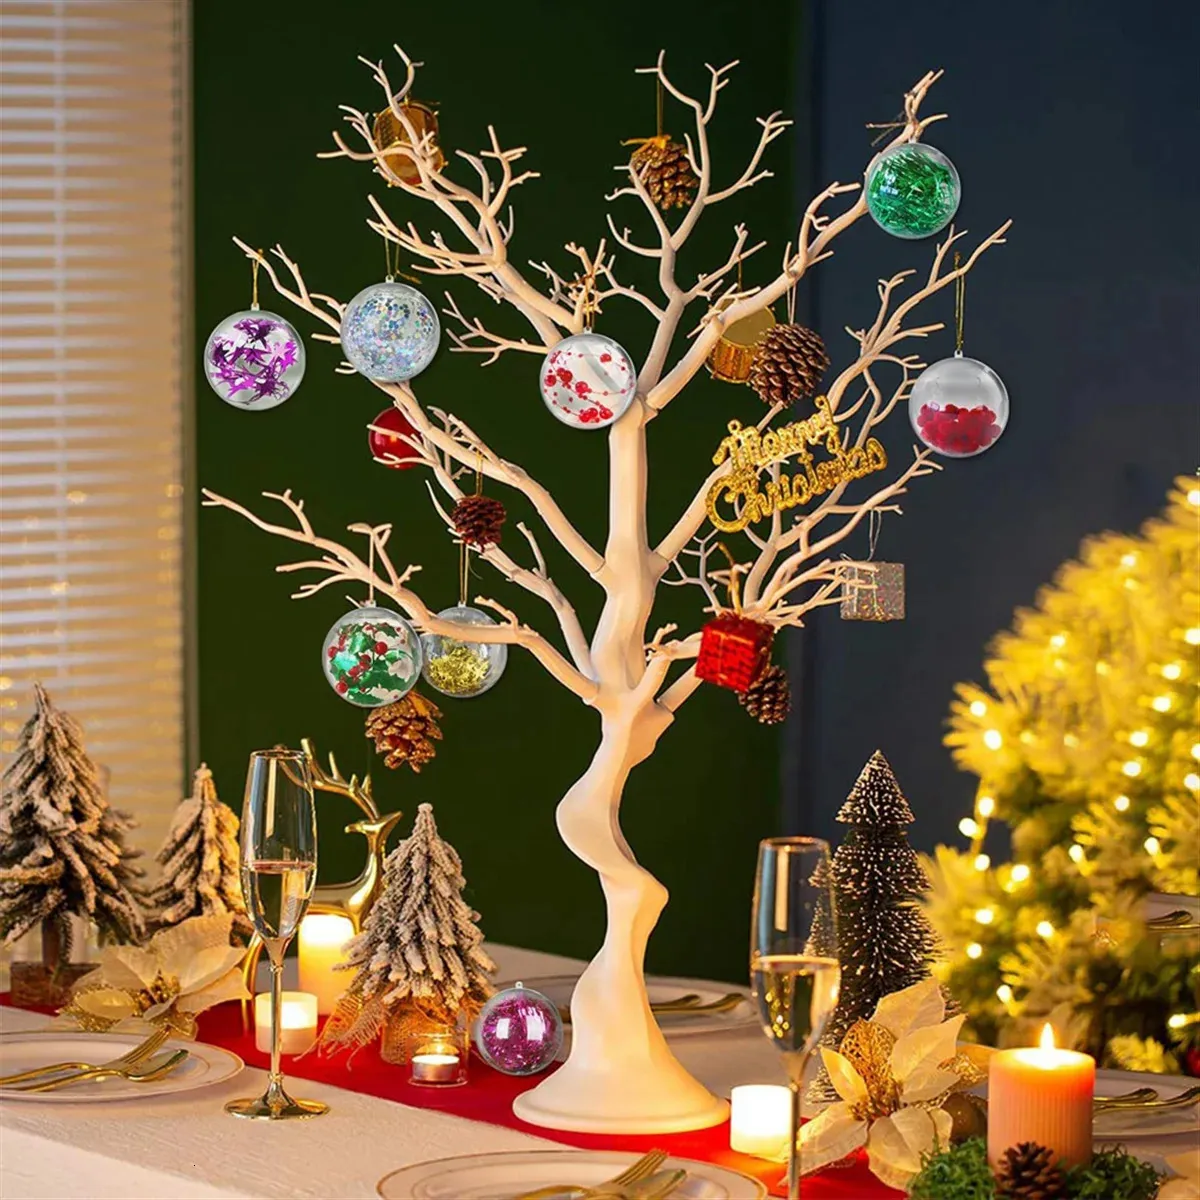 5cm Fillable Plastic Ornaments For DIY Christmas Metal Rings For Crafts  A231018 From Long10, $14.26